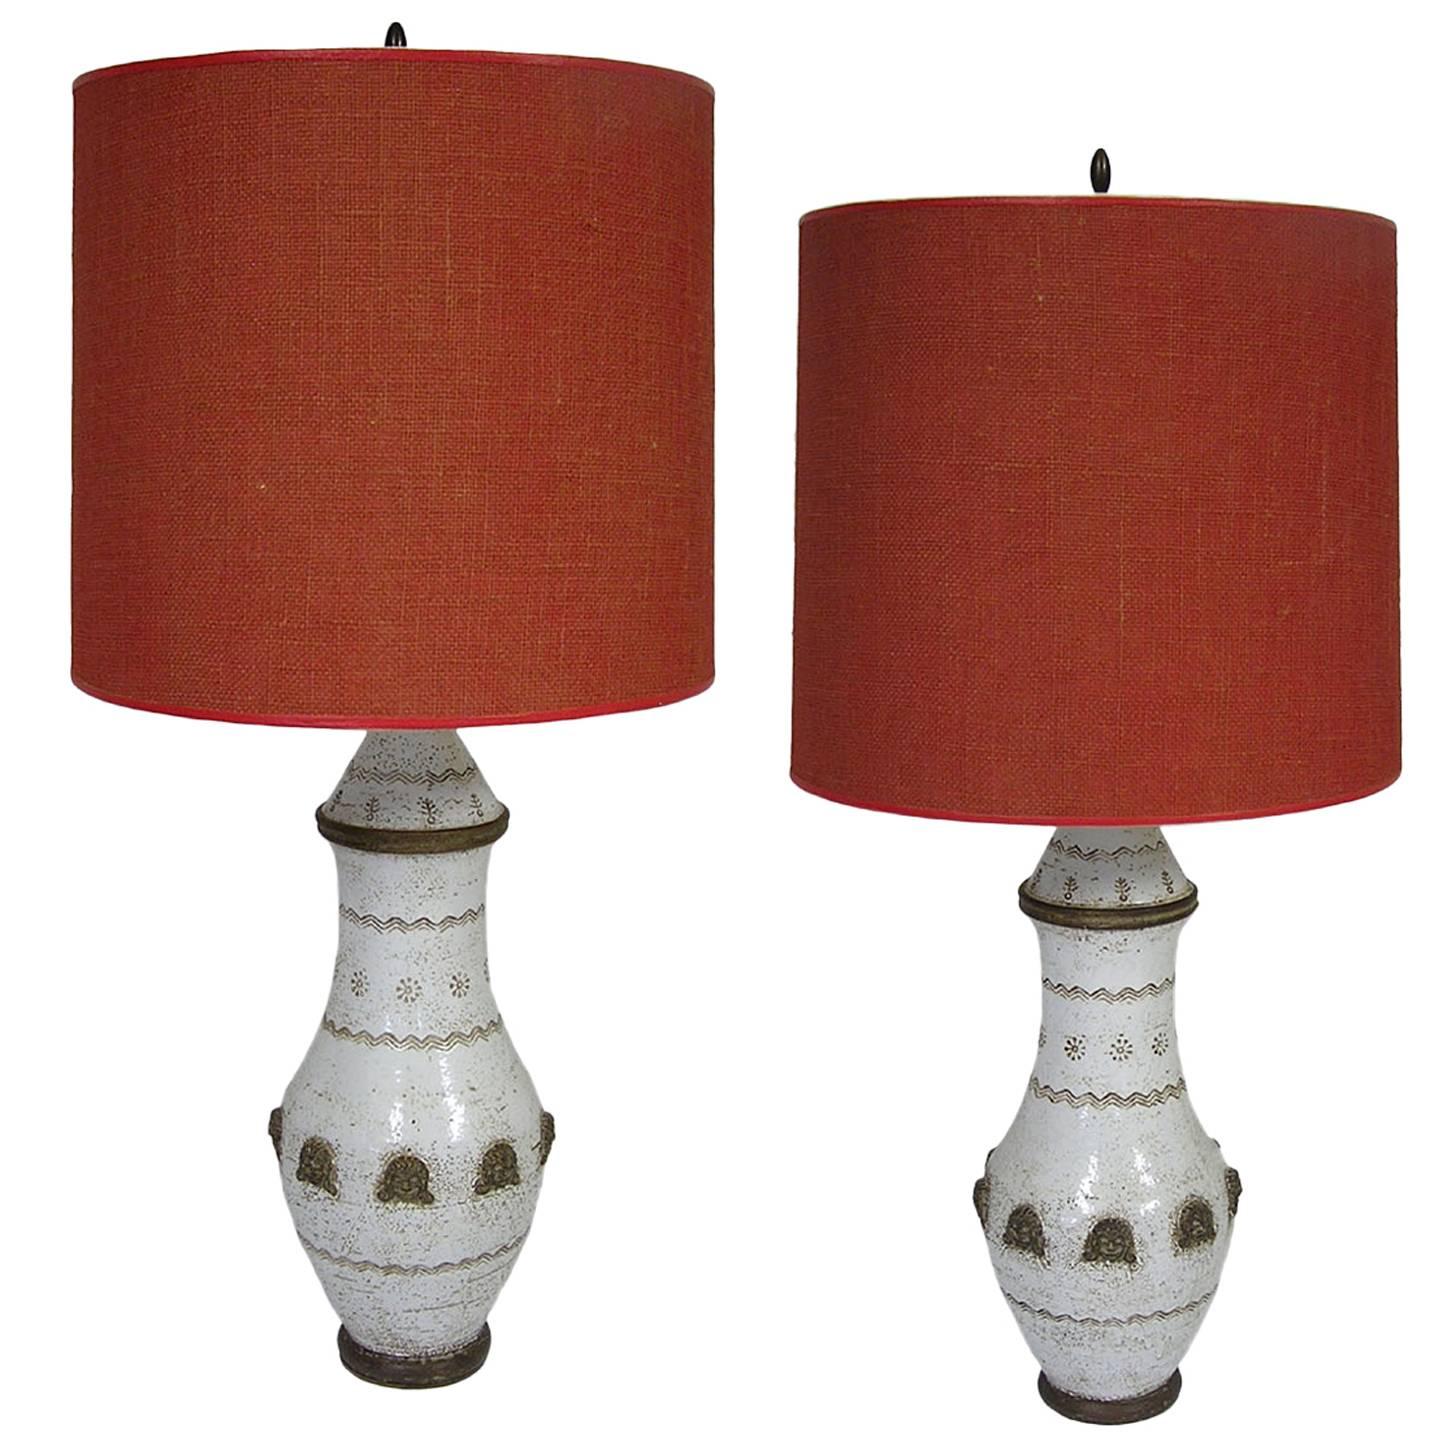 Pair of Mid-Century Modern Italian Pottery Lamps by Ugo Zaccagnini, circa 1950s For Sale